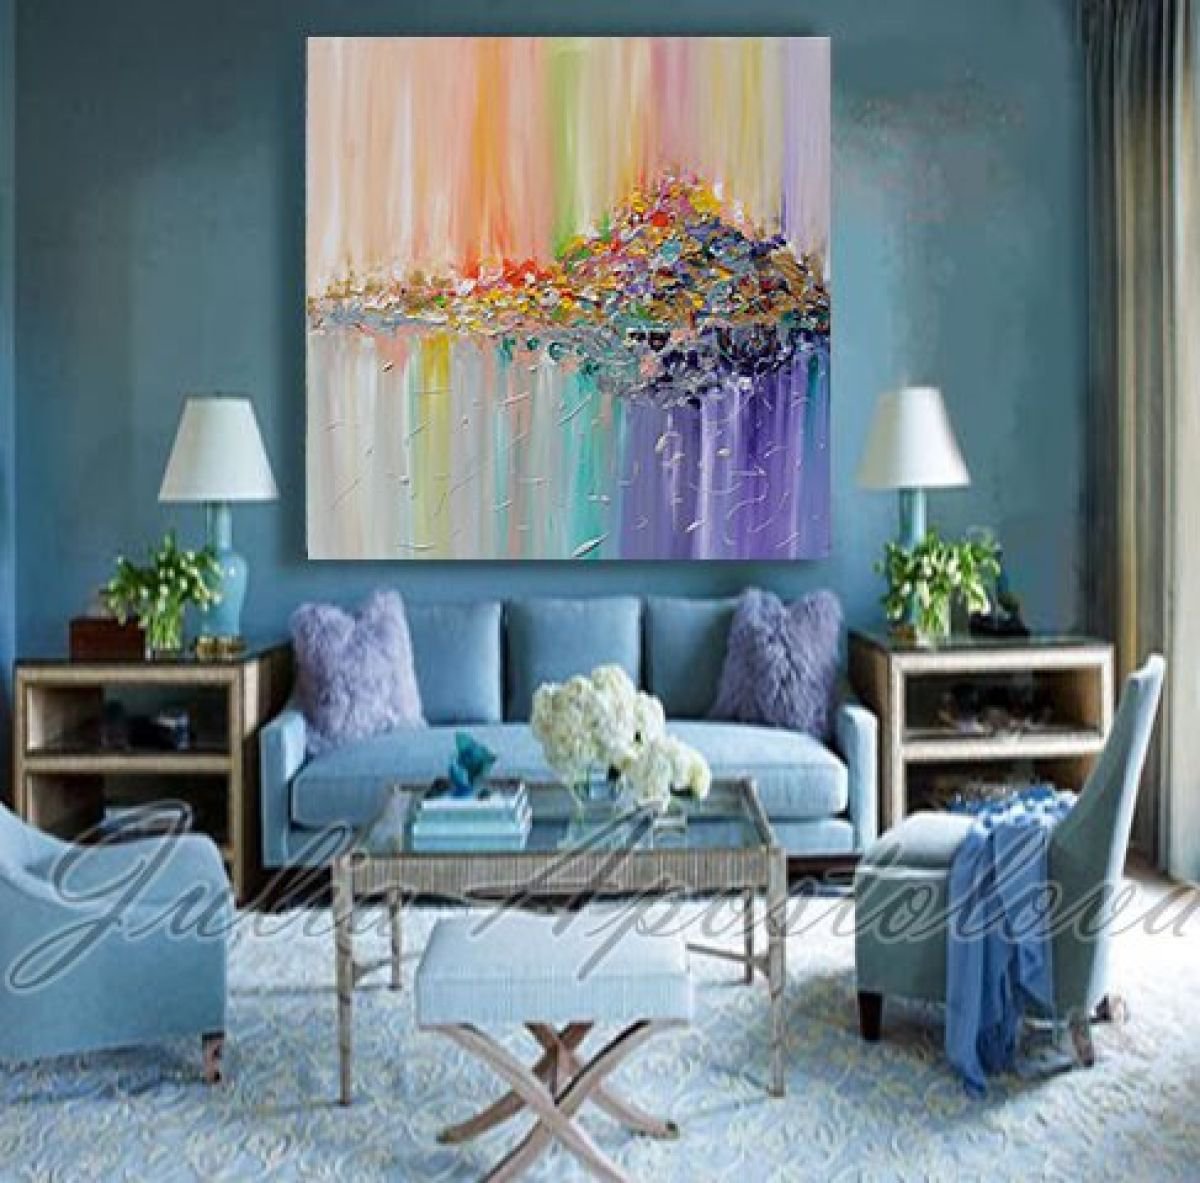 Oil Paintings On Canvas Hand Painted,Abstract Landscape Painting,Modern European Rainbow Colorful Trees And Reflection,Large Size Wall Decoration For Entrance Living Room Adults Gifts,40 X 80 Cm 